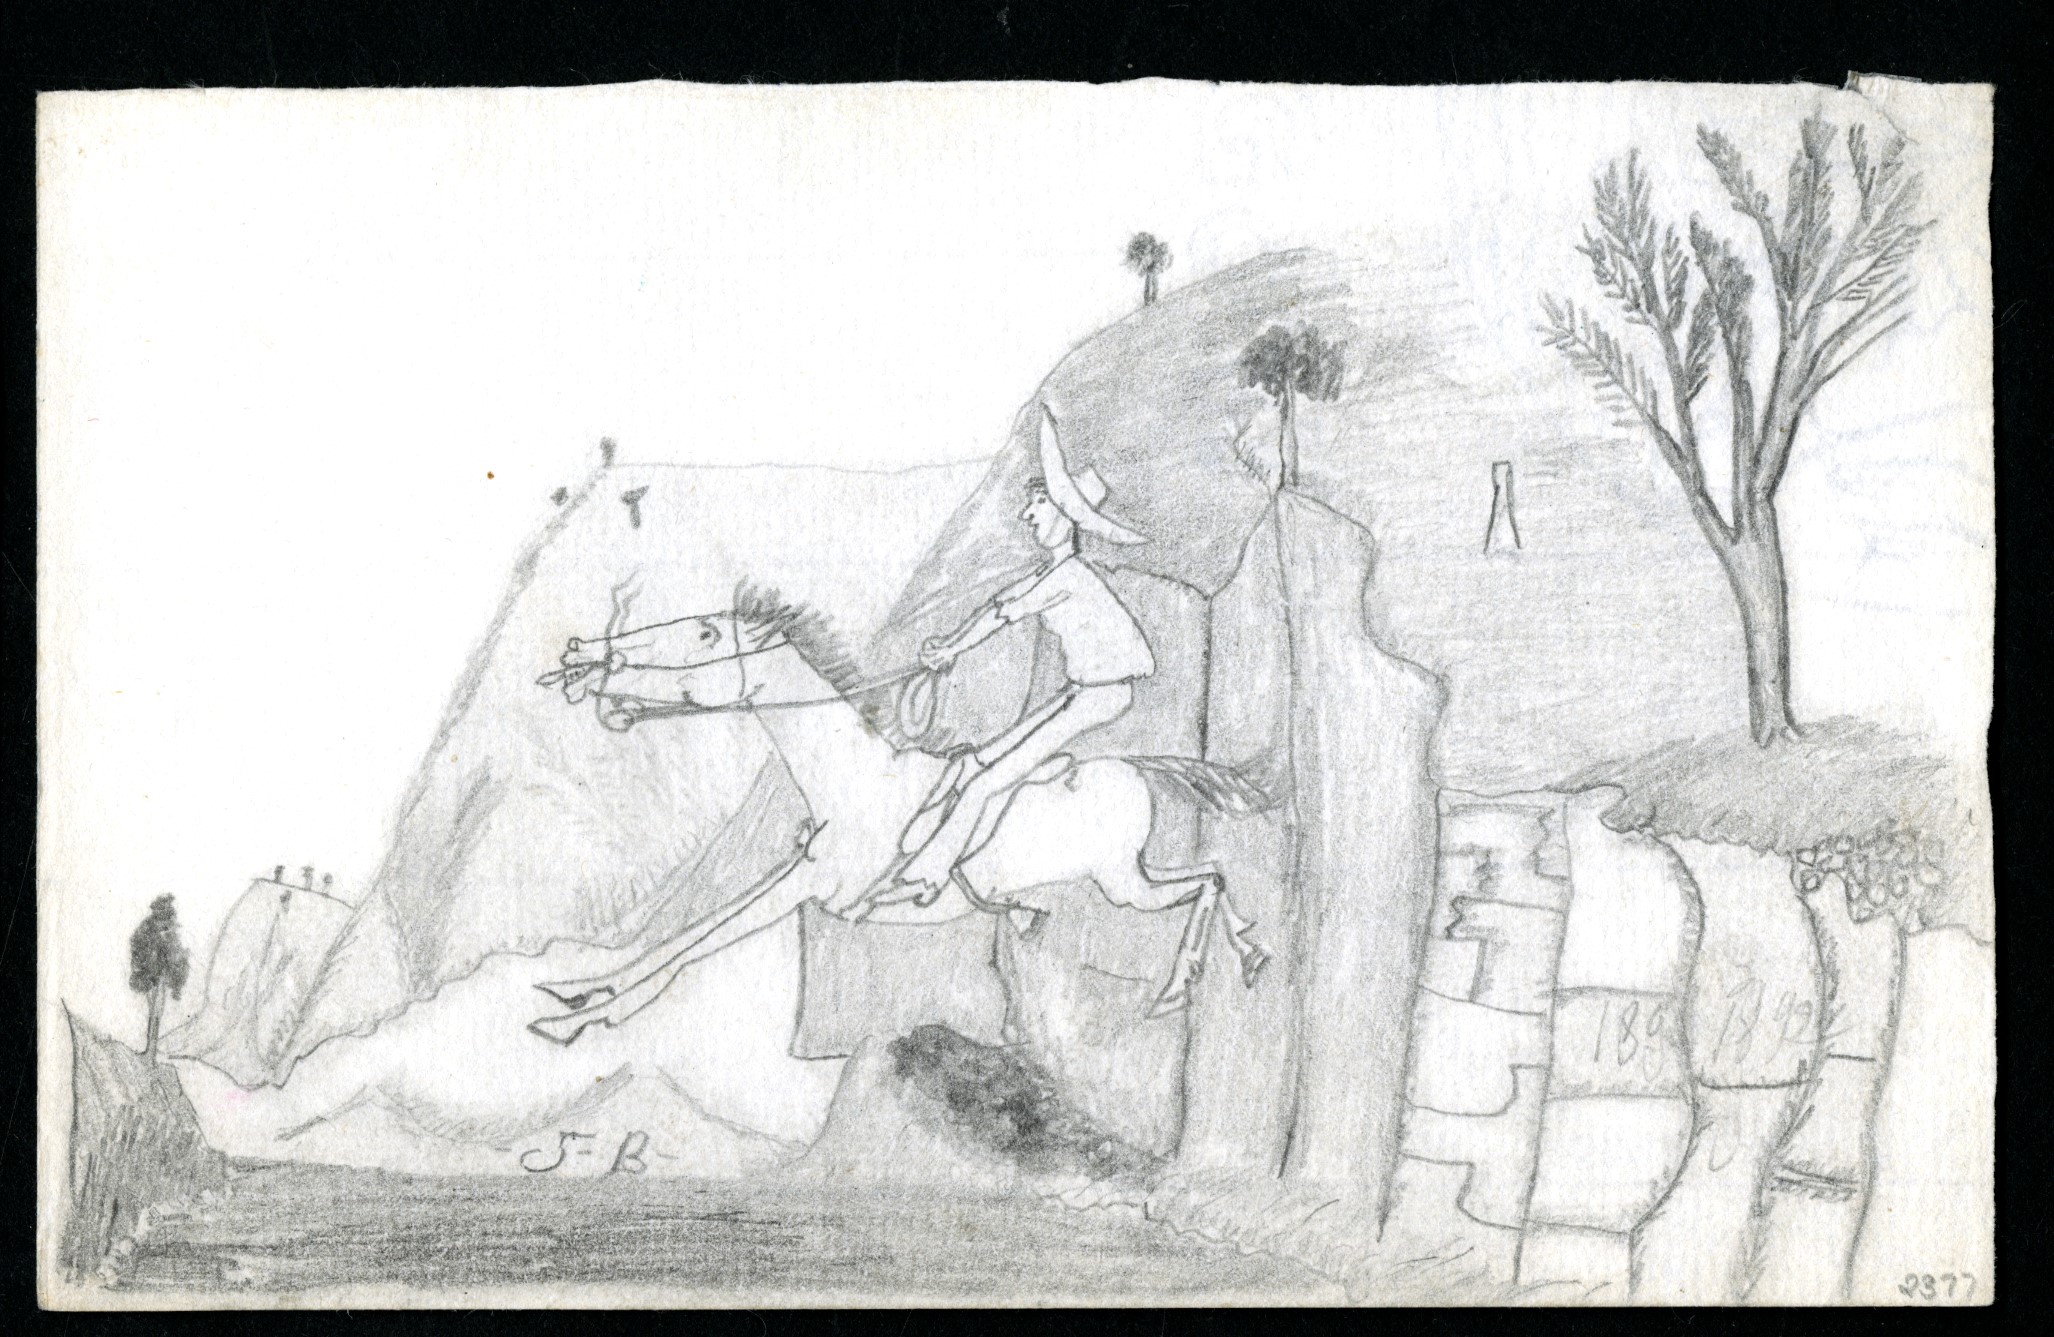 drawn image of cowboy on horse in bush